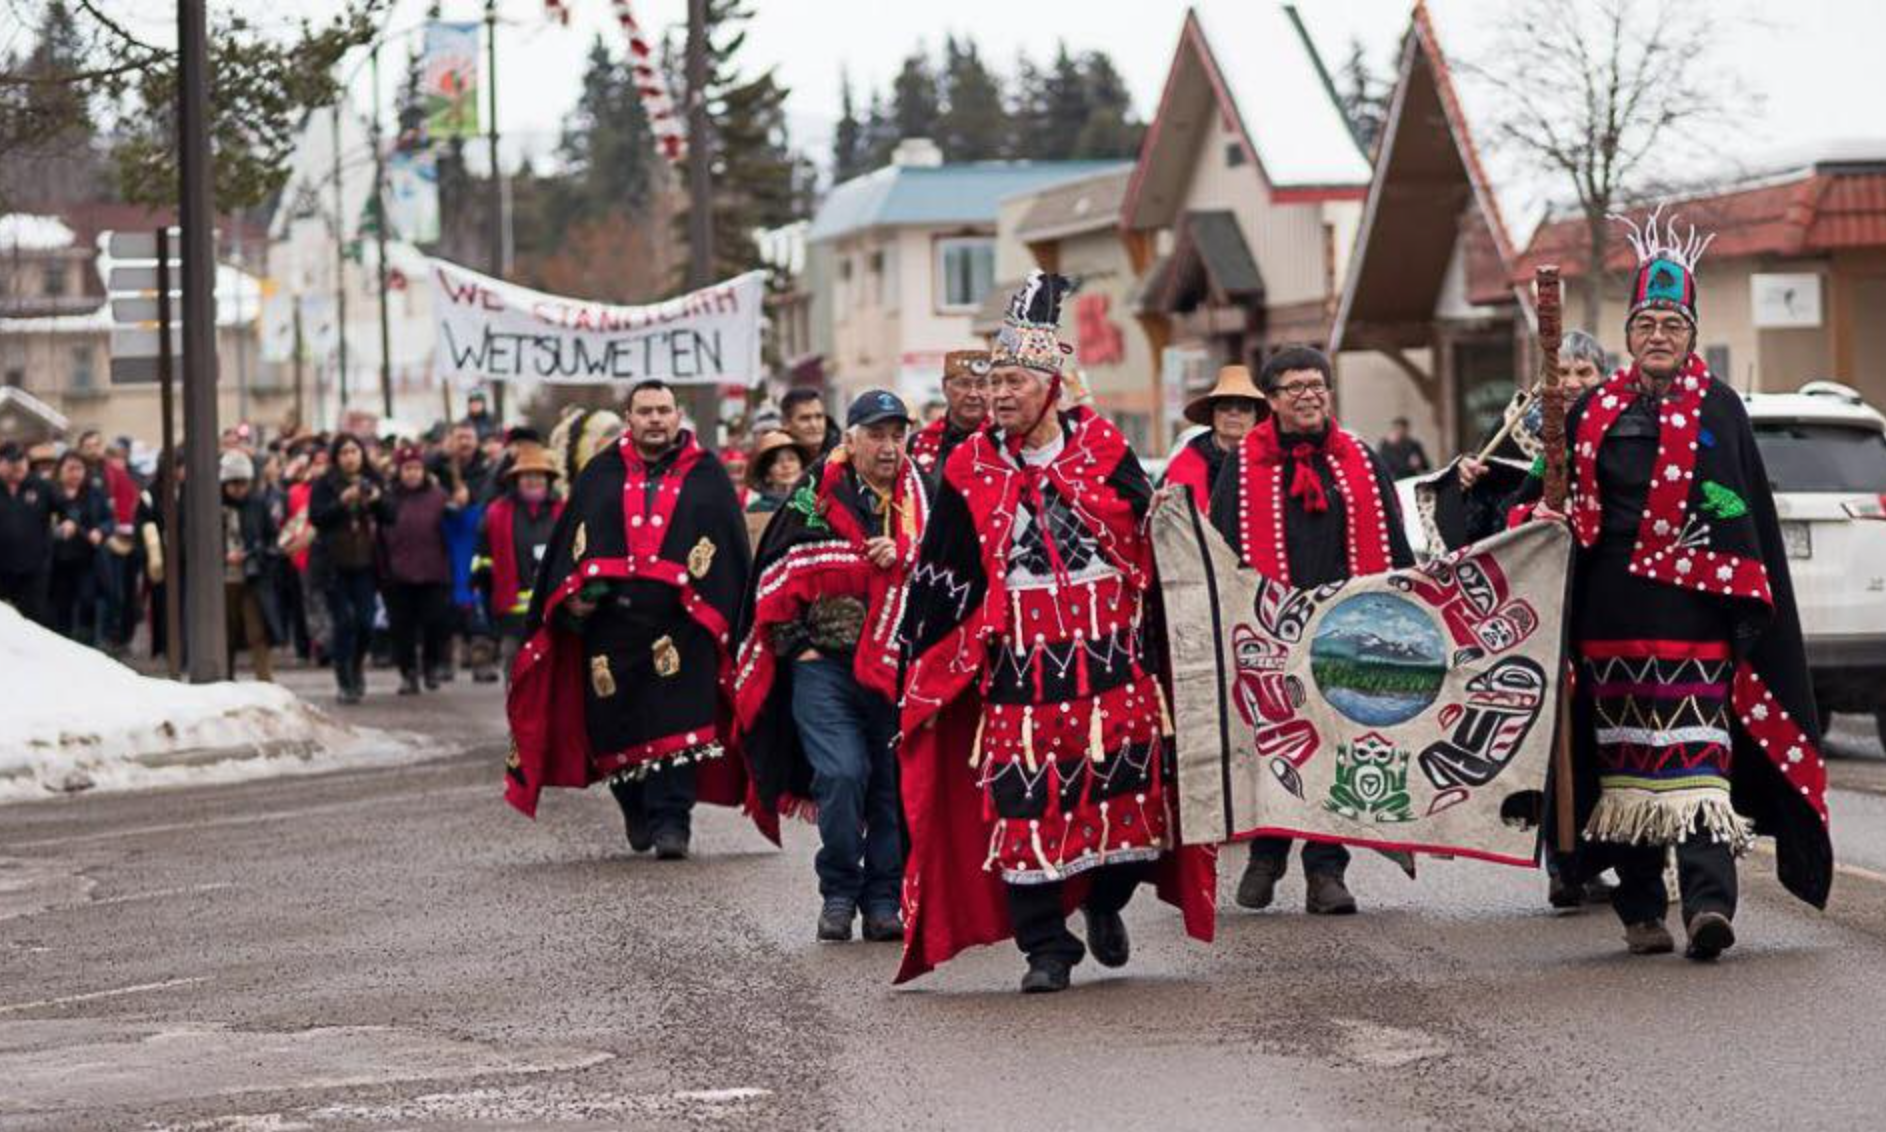 Wet'suwet'en Solidarity March, January 17, 2019 (Photo by Walter Joseph Photography)